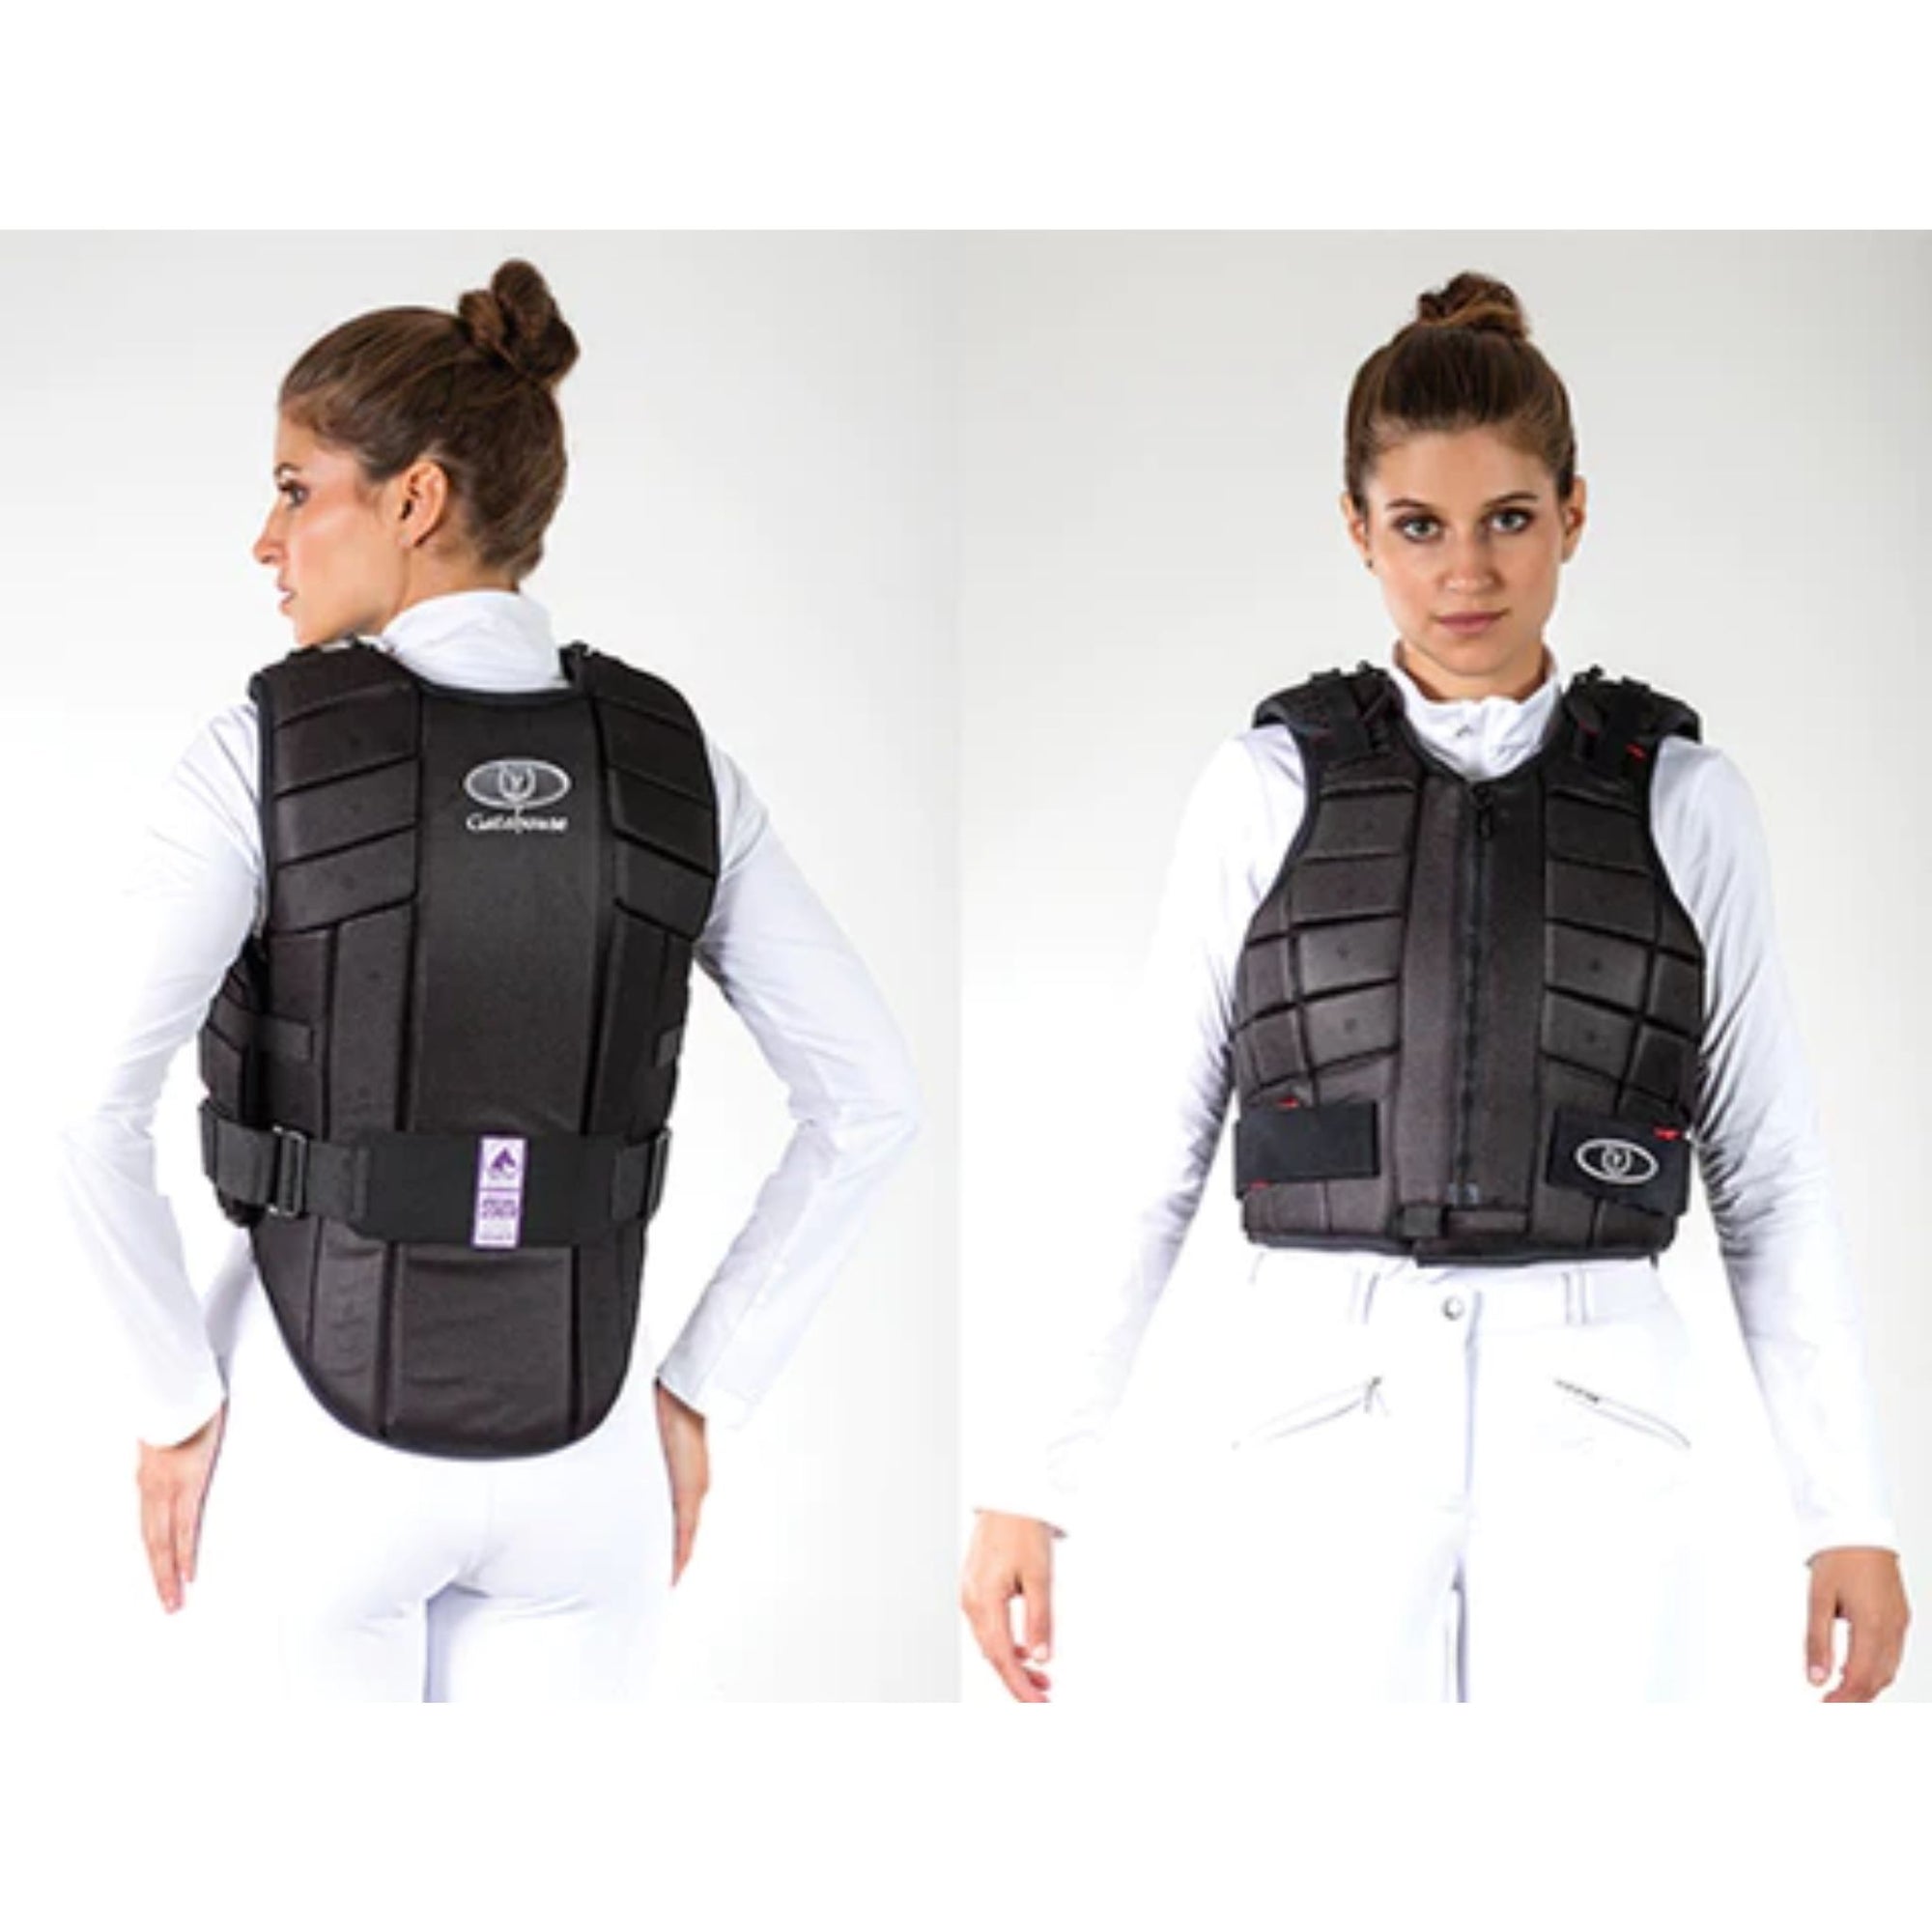  Black body protector with middle zip and fasteners on shoulders and sides.